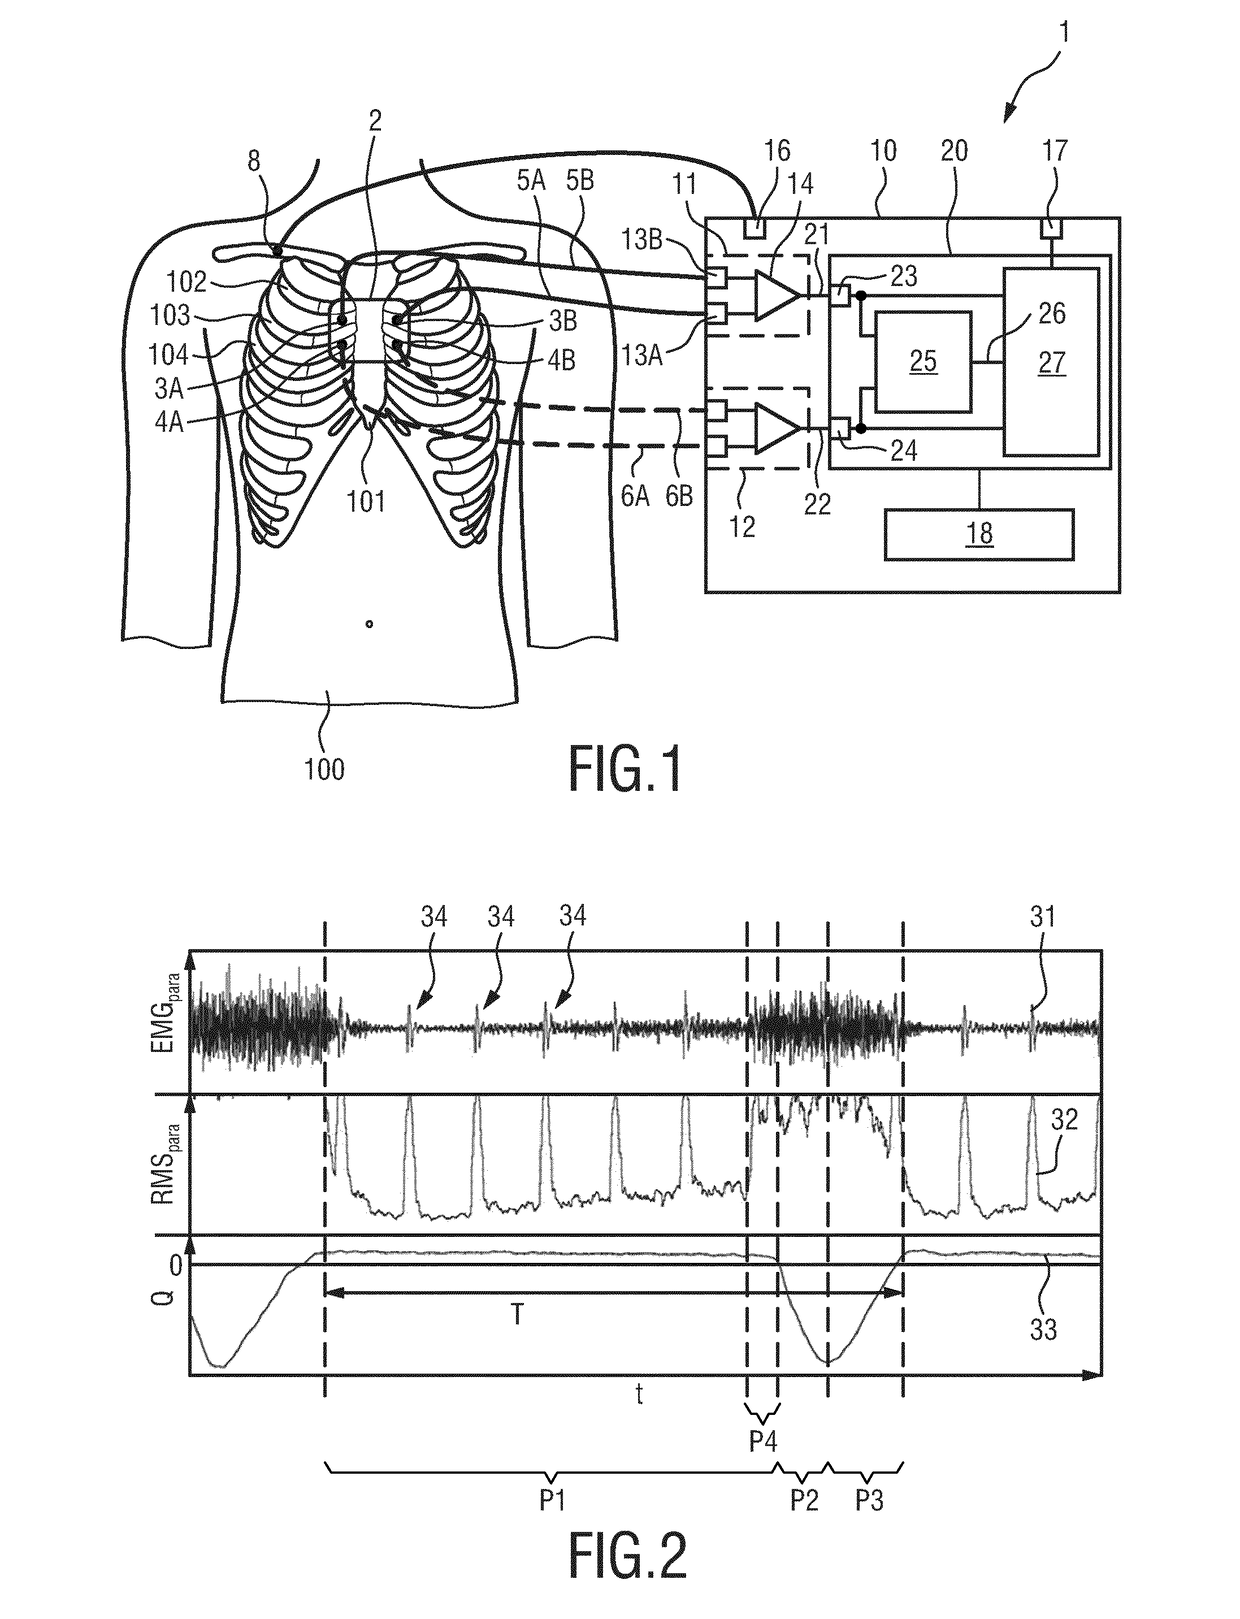 Apparatus and method for processing electromyography signals related to respiratory activity